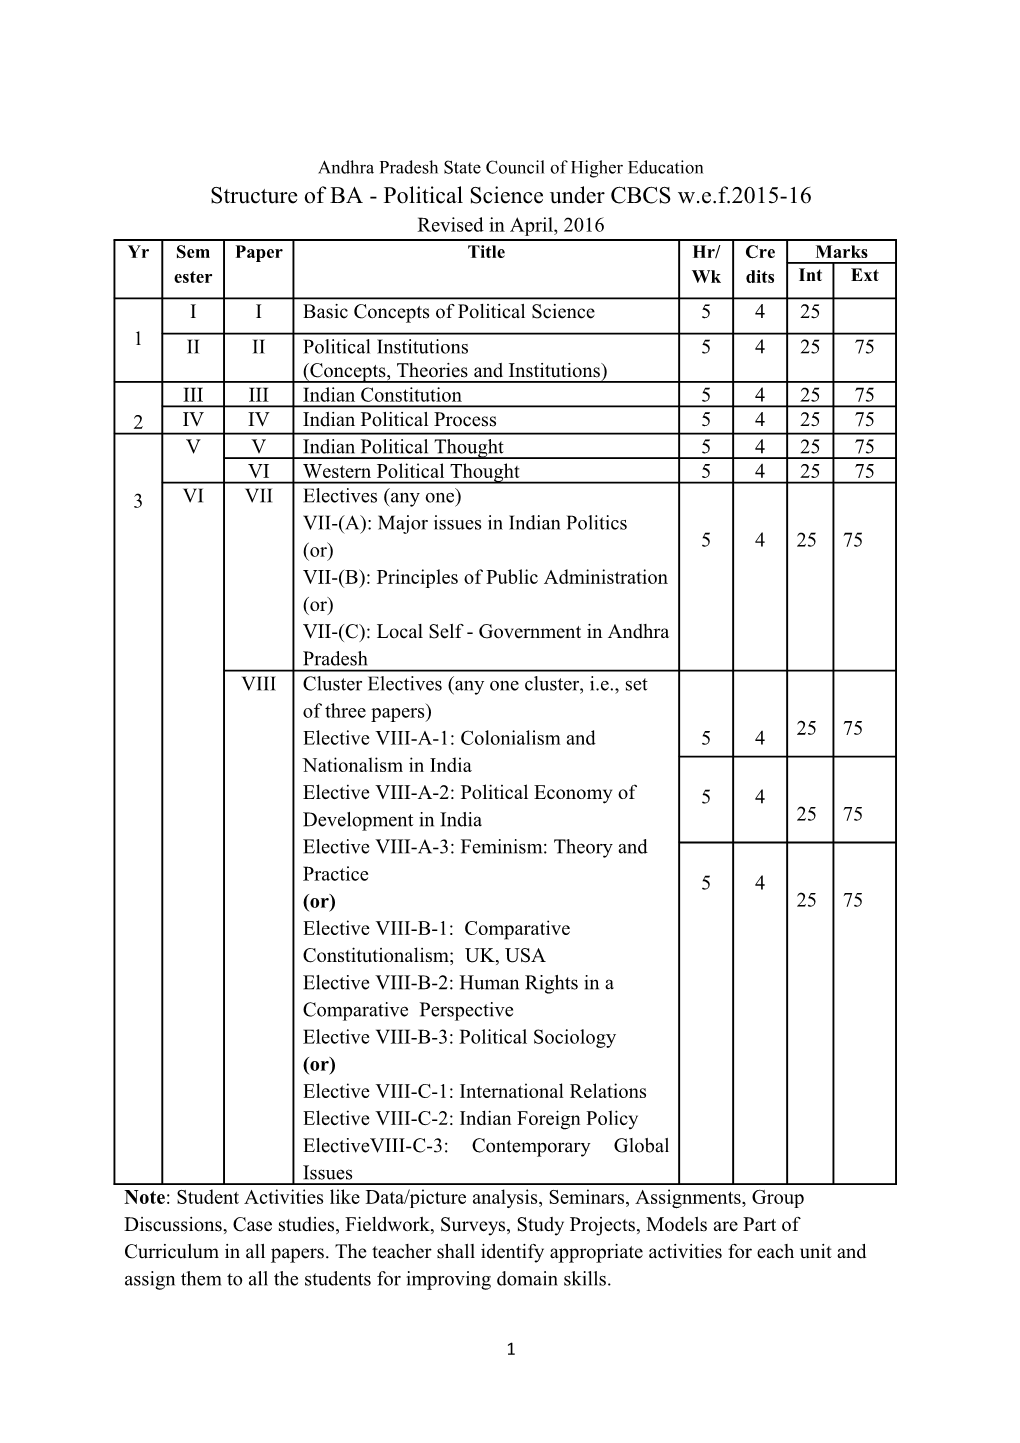 Andhra Pradesh State Council of Higher Education s1